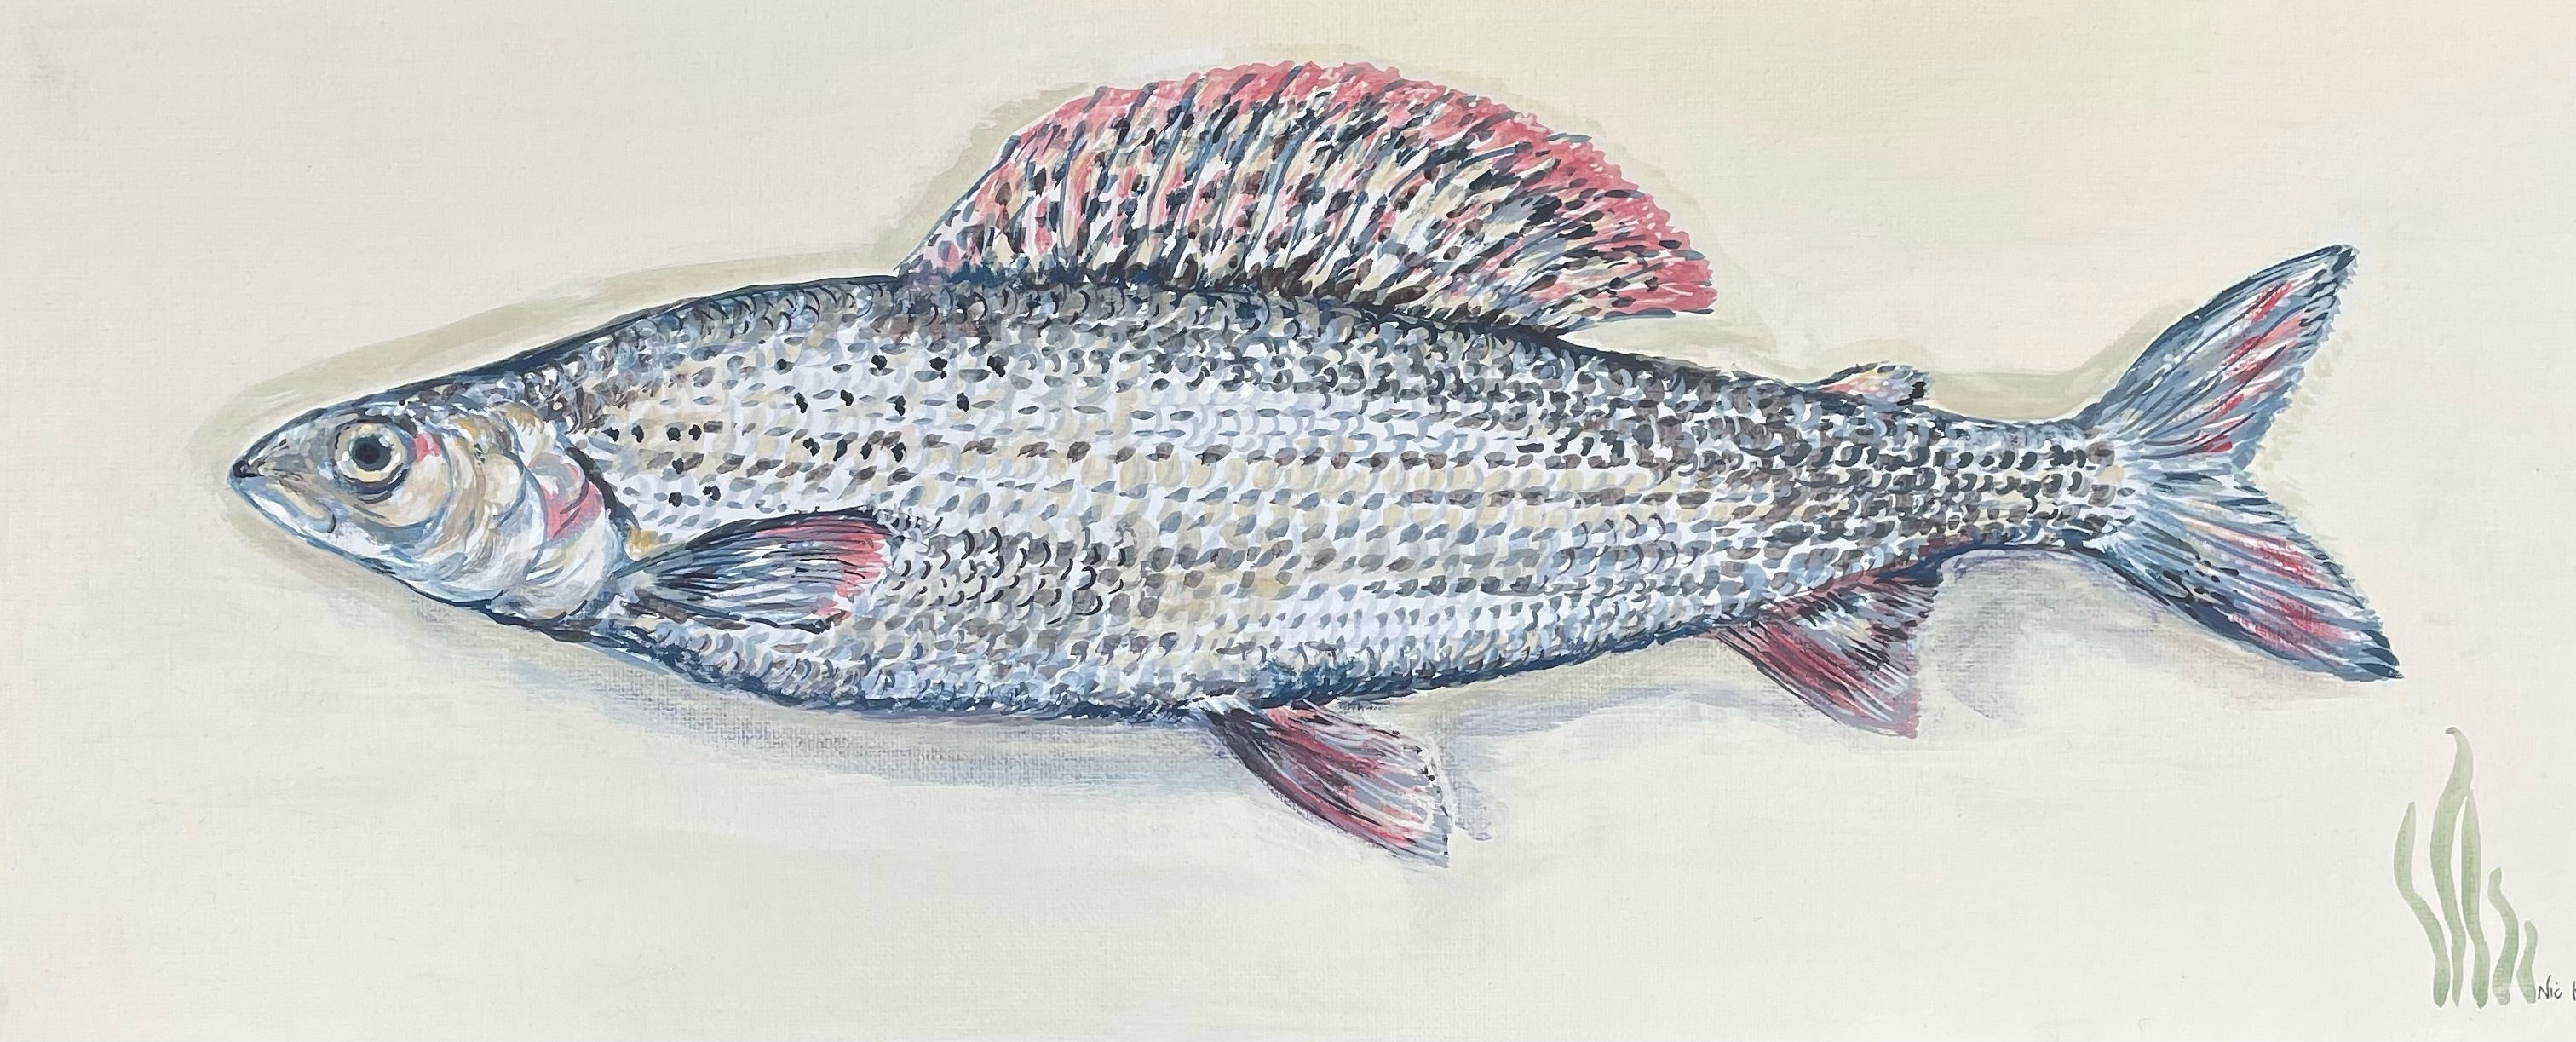 Grayling.  This painting is reminiscent of the traditional taxidermy fish displayed in a glass fronted case, often seen in country houses and fieldsports lodges.